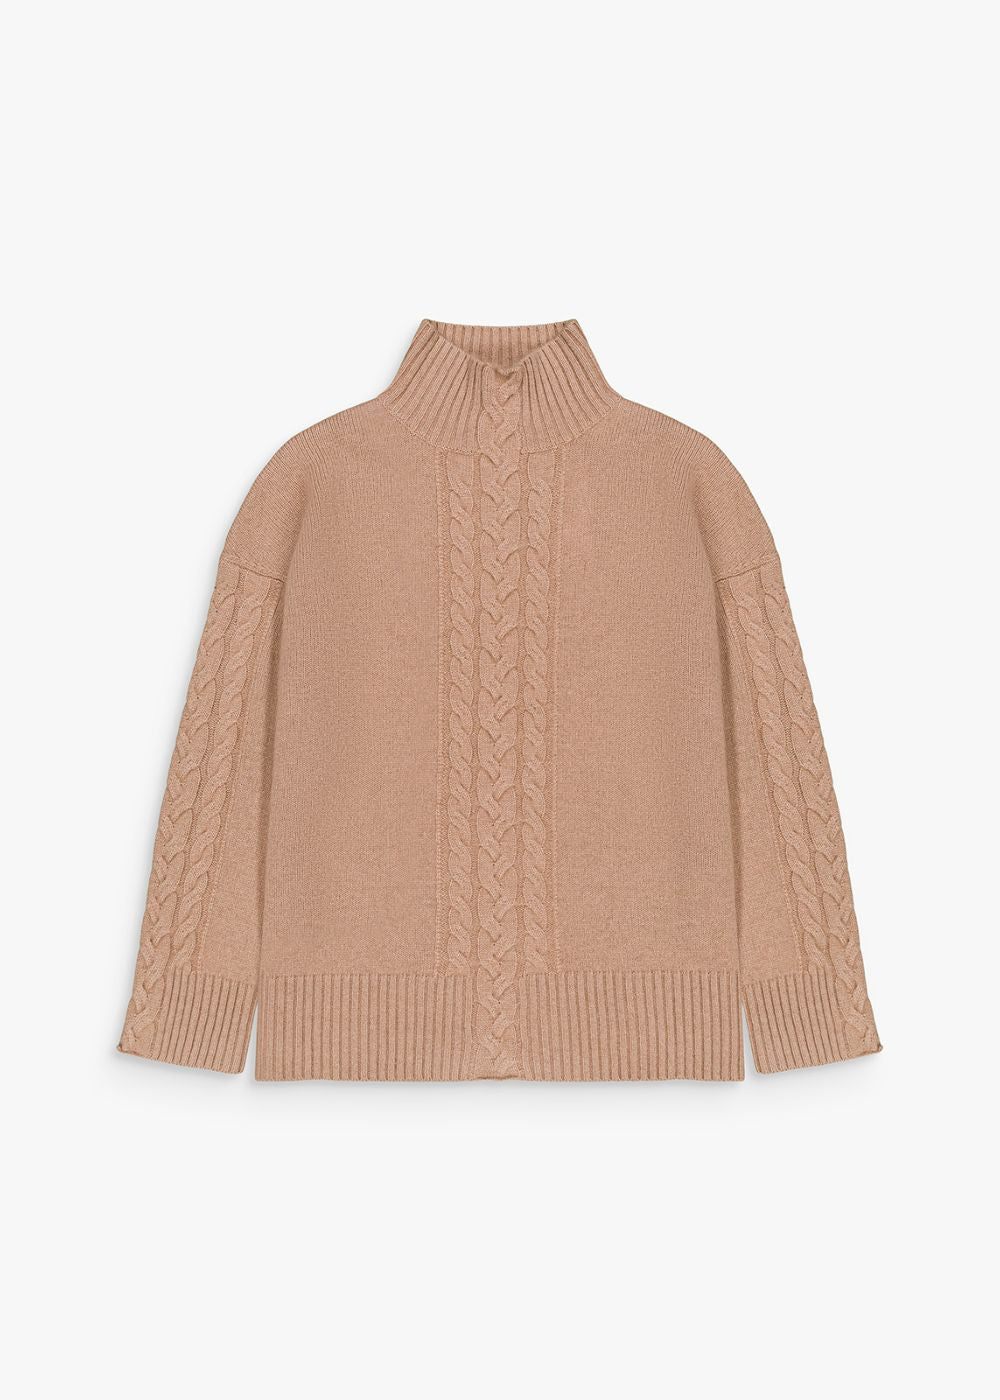 Pull col camionneur camel